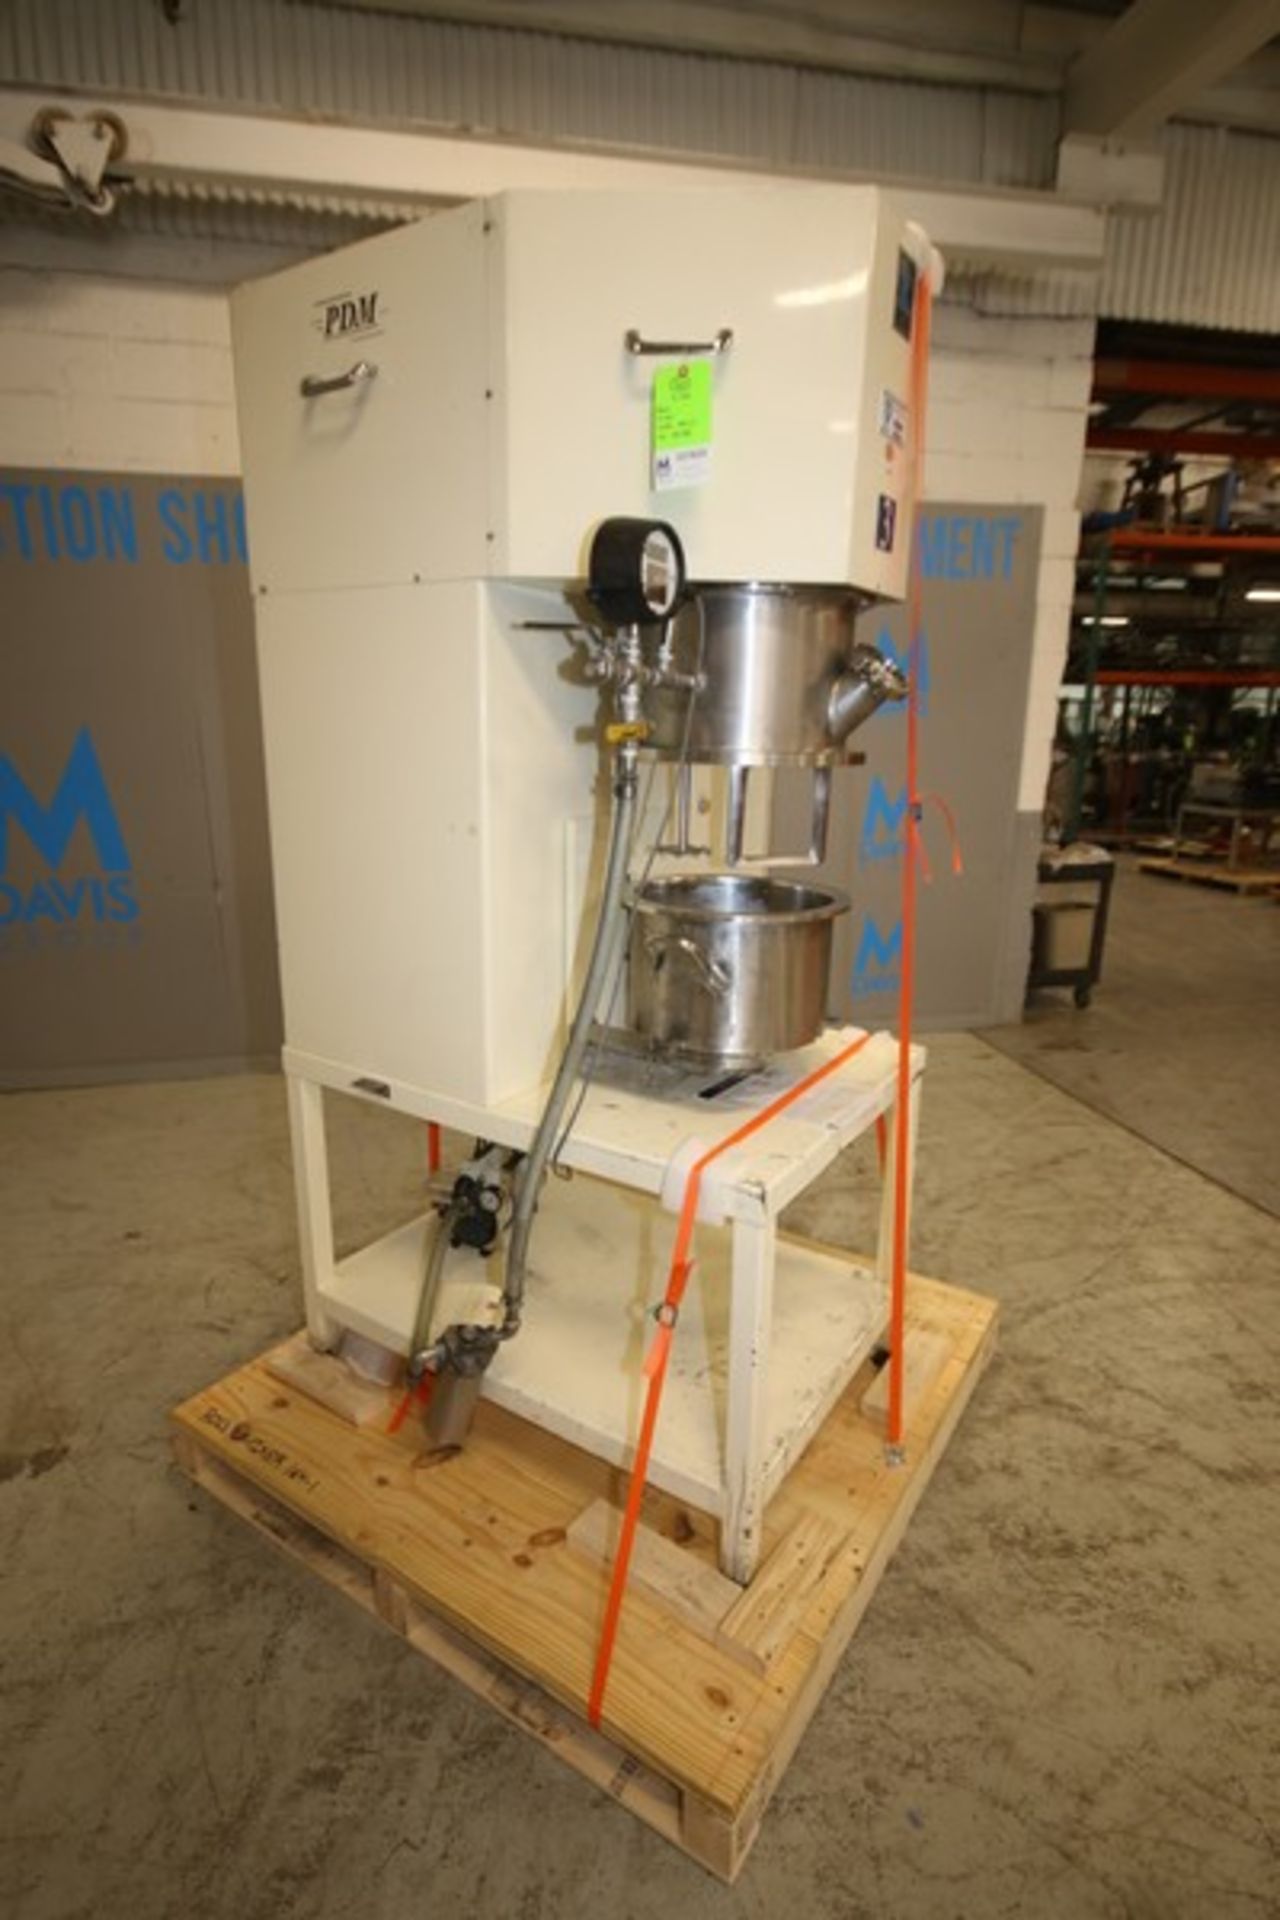 Ross Planetary Mixer, Model PDM-4, SN 106785, with Stirrer & Disperser, 14" W x 8" D S/S Mixing